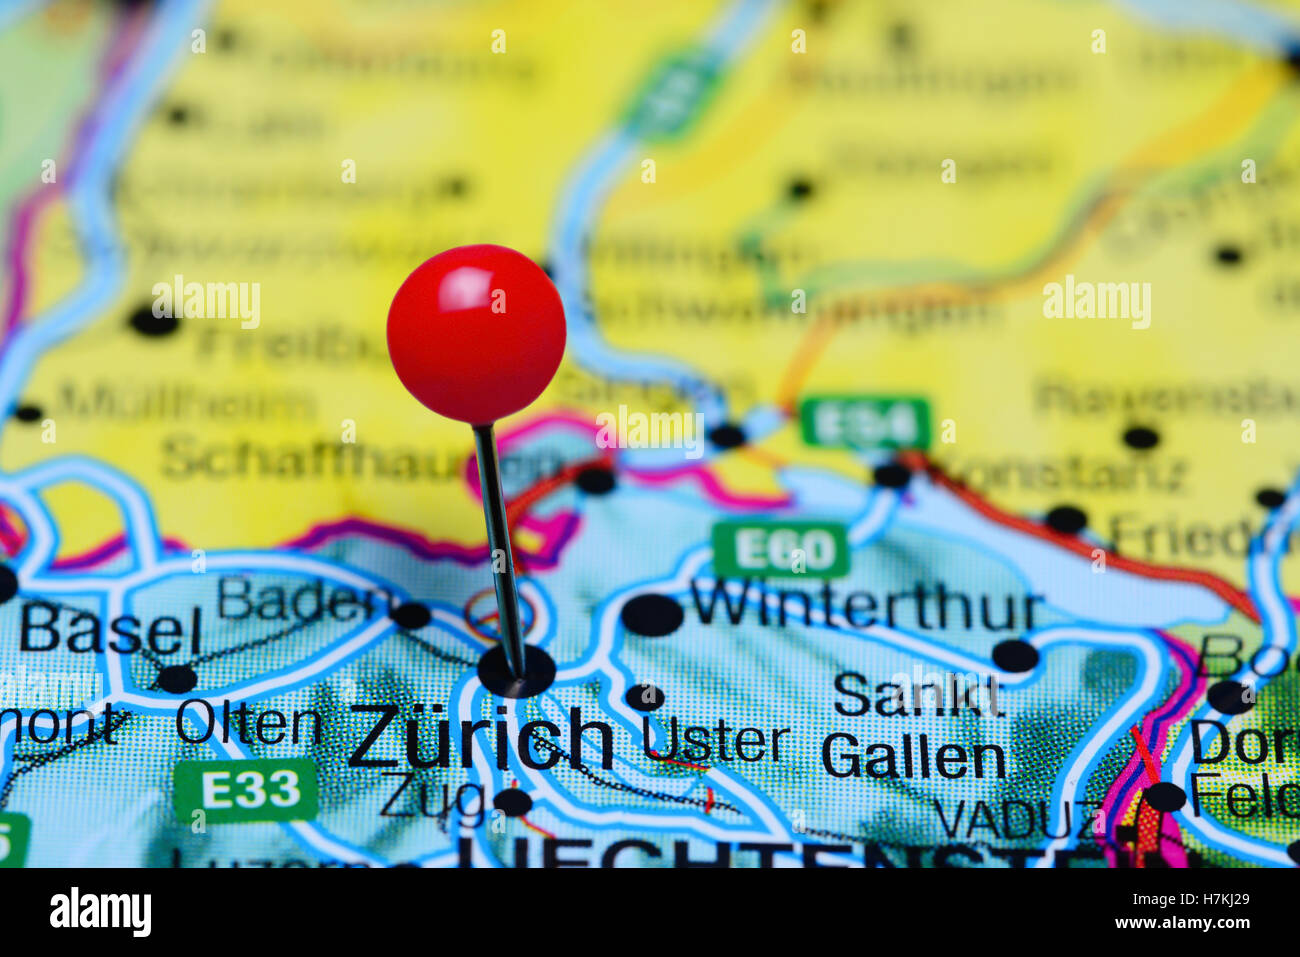 Zurich pinned on a map of Switzerland Stock Photo